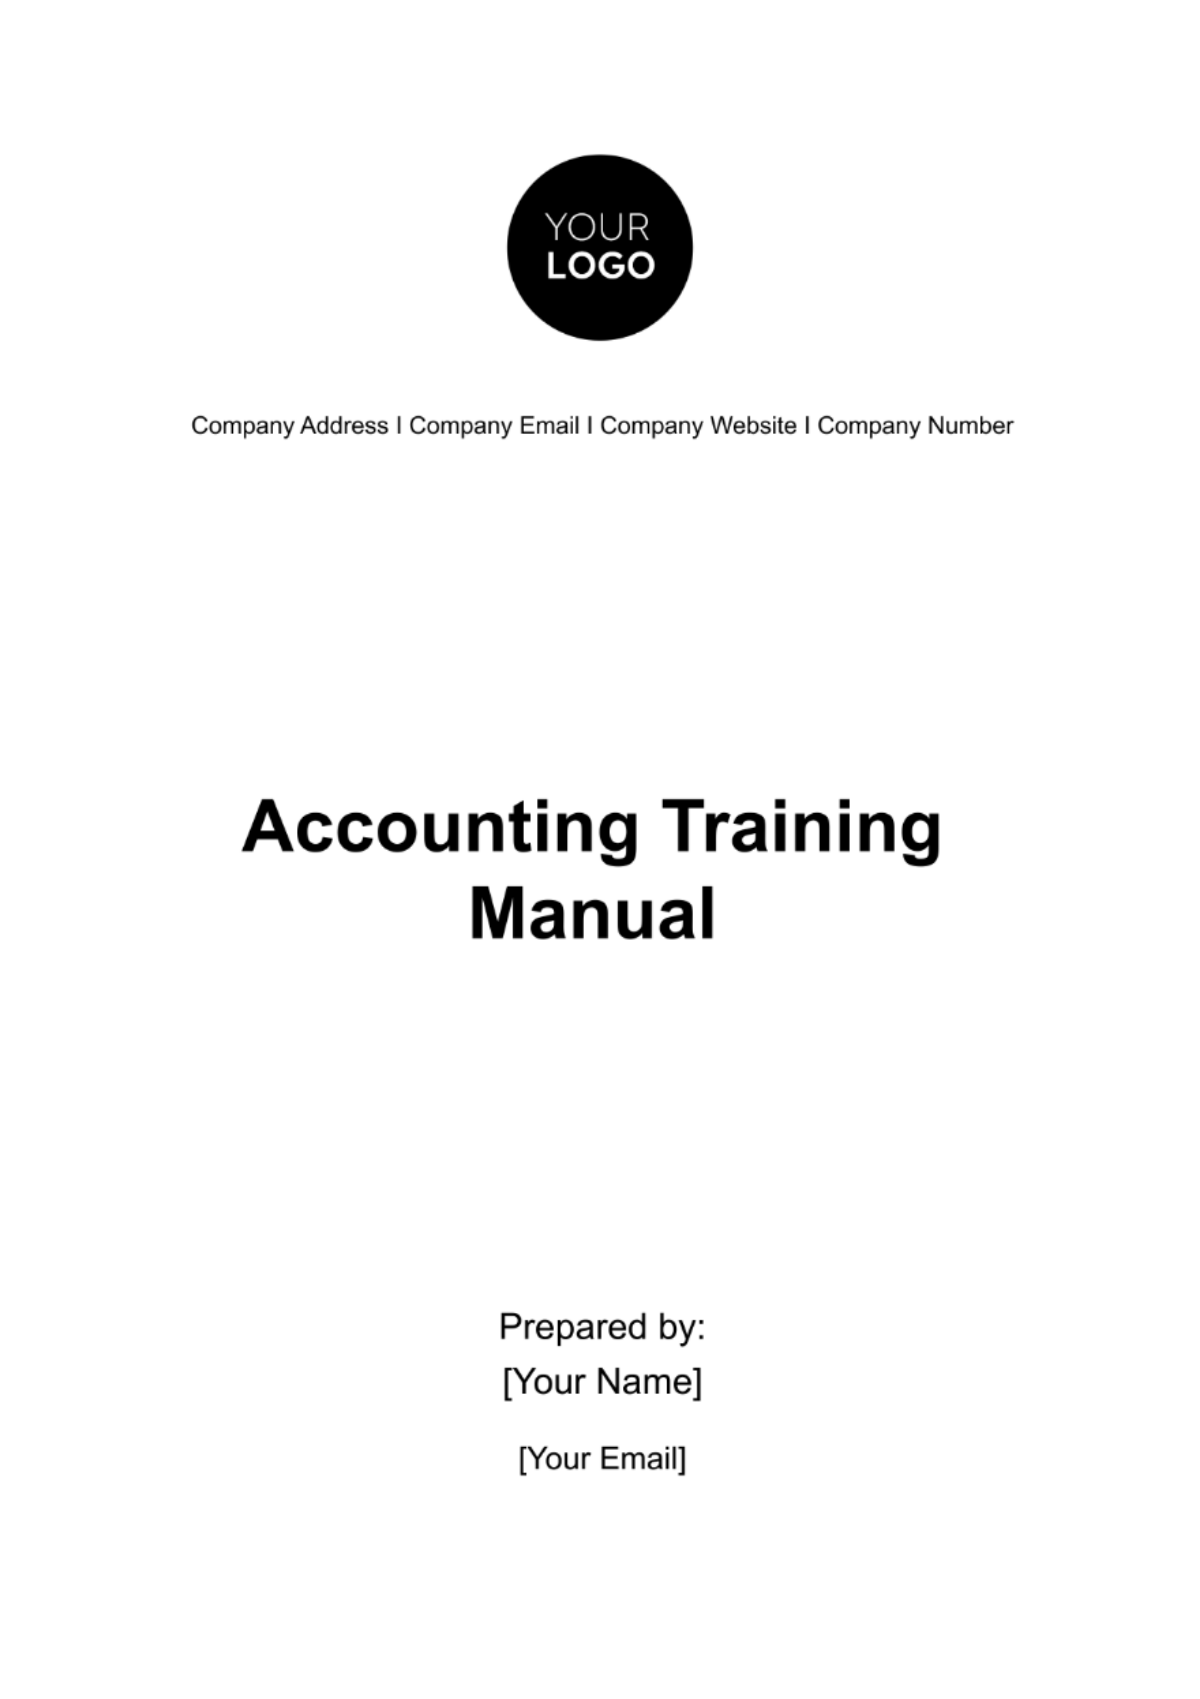 Accounting Training Manual Template